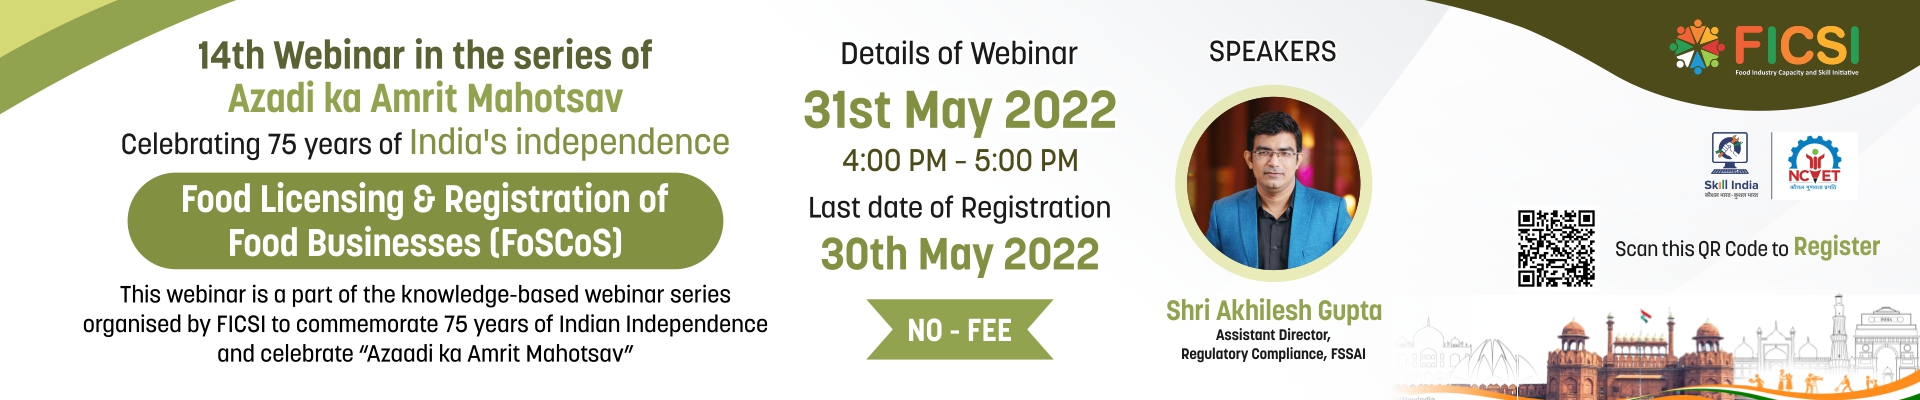 https://campaign-image.in/zohocampaigns/74500000000254817_zc_v256_1663661854926_webinar31may.jpg